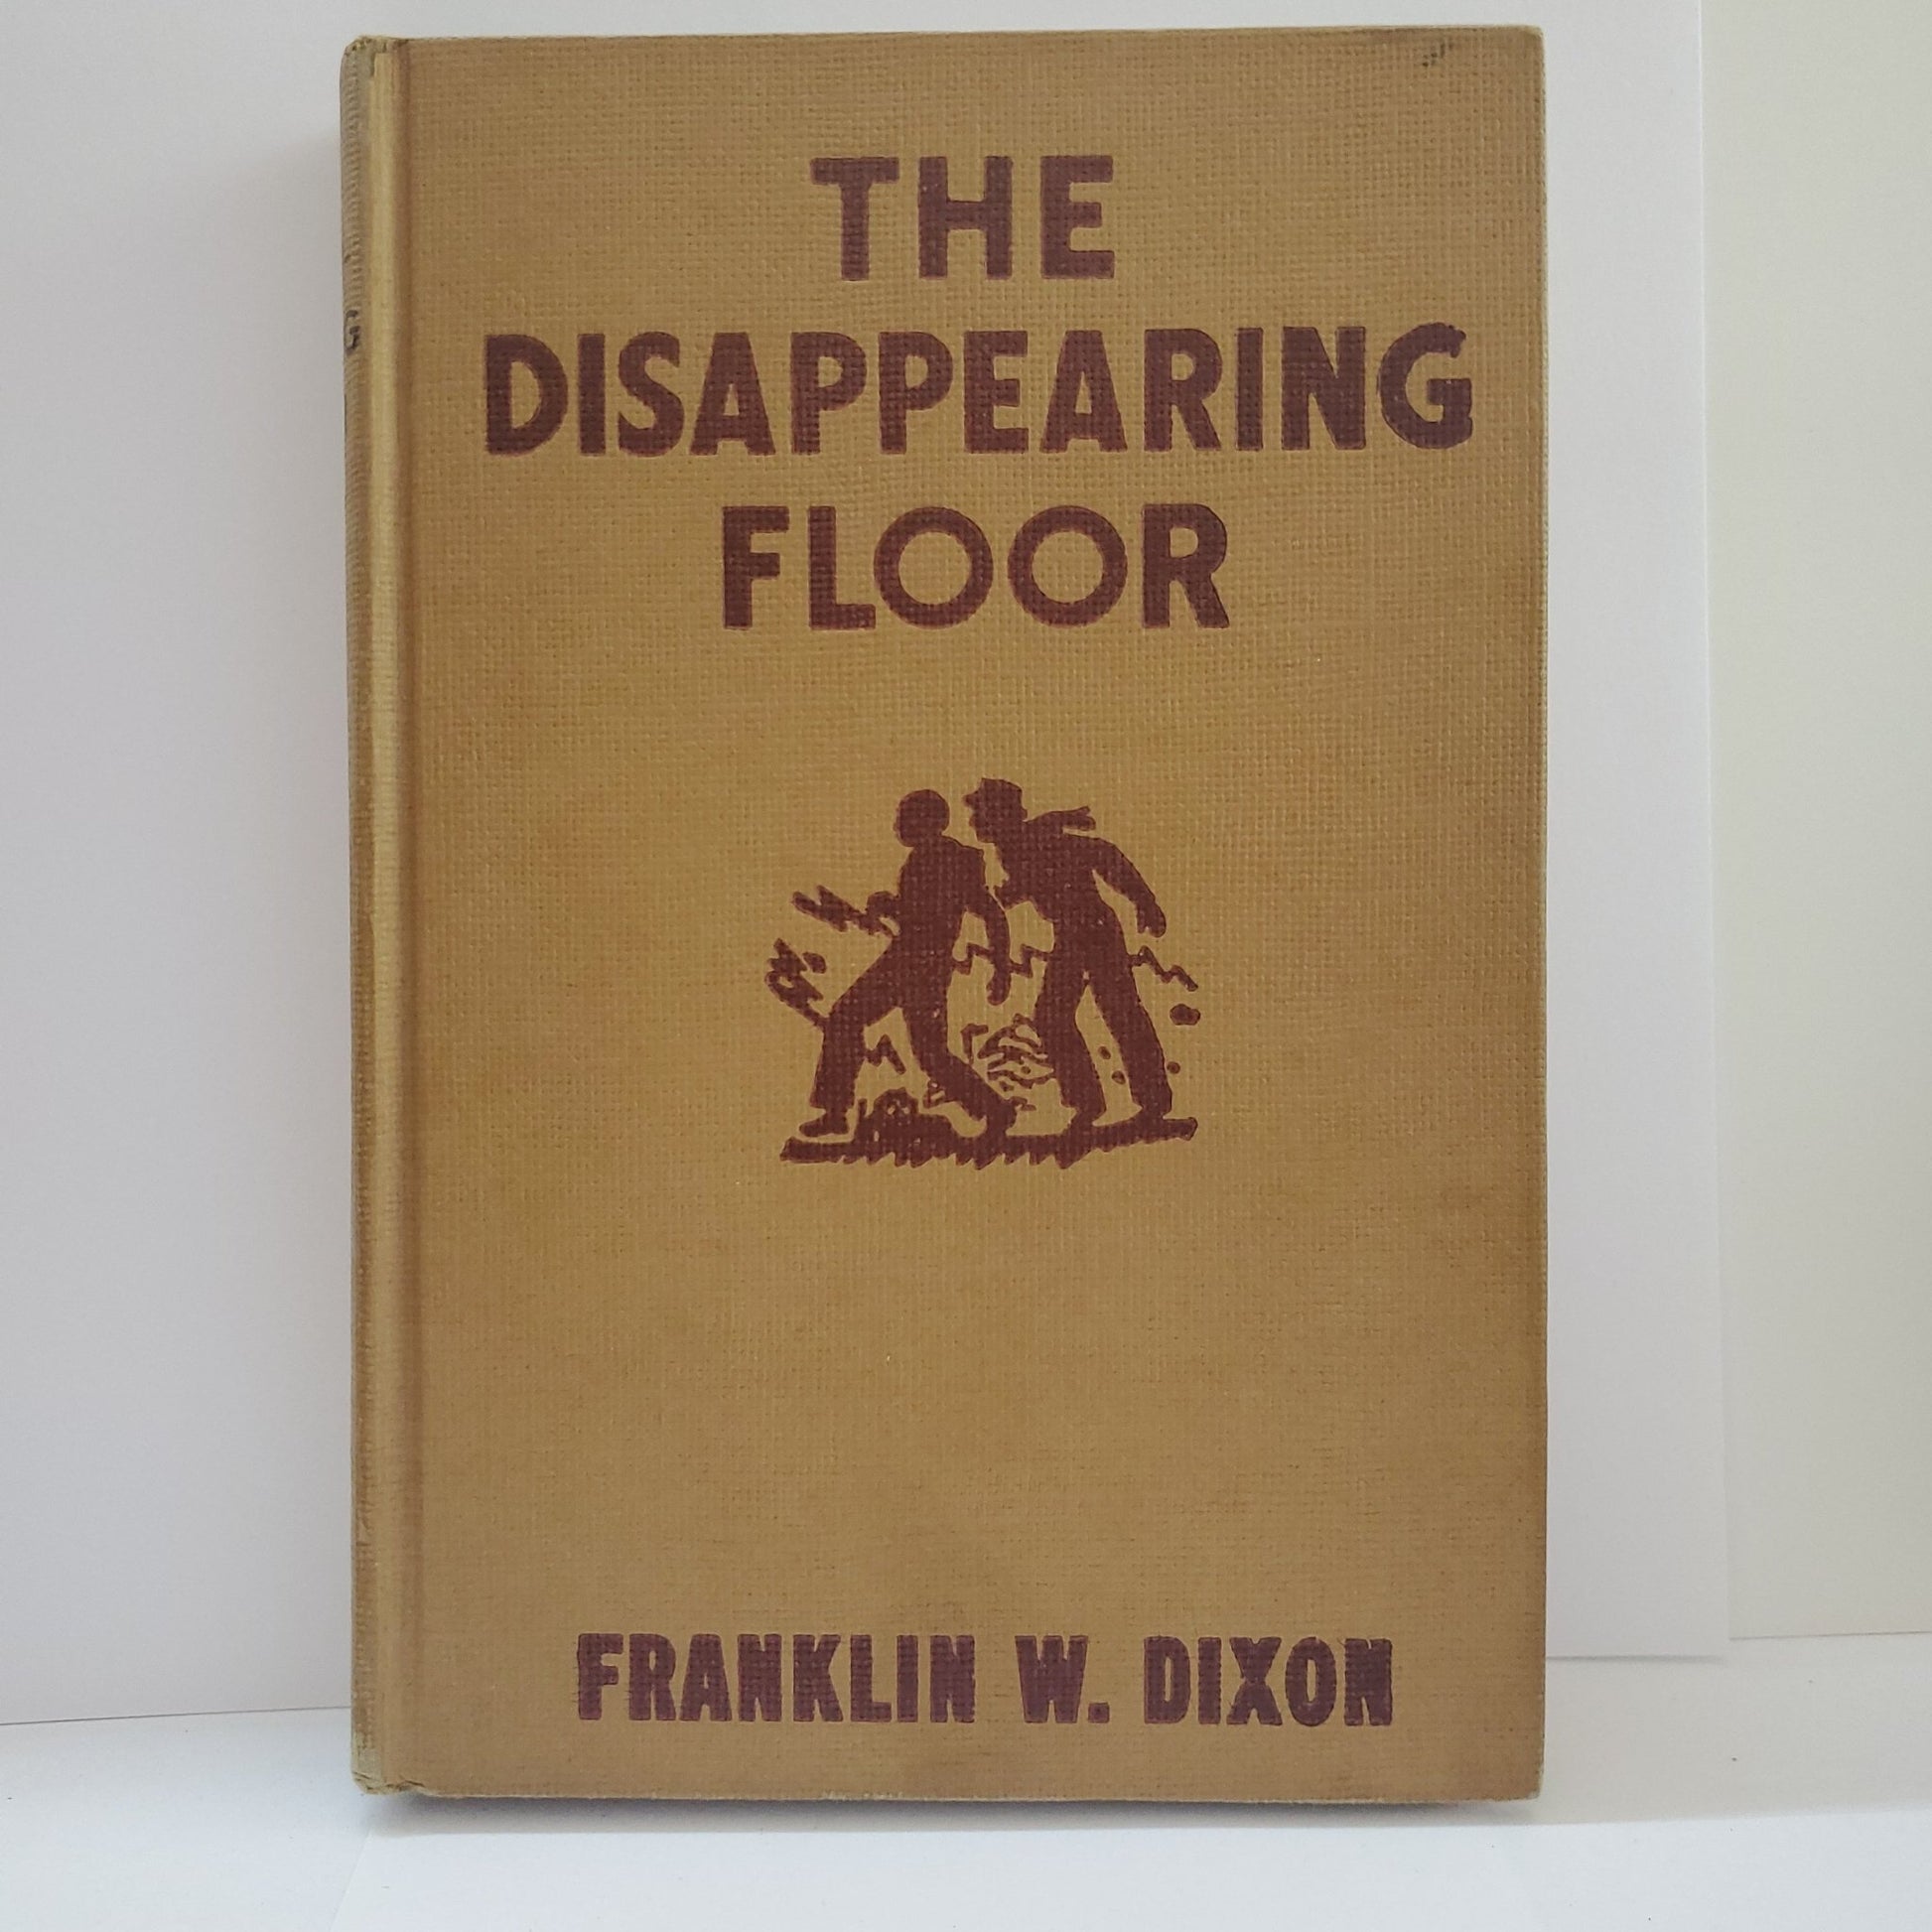 The Disappearing Floor - [ash-ling] Booksellers